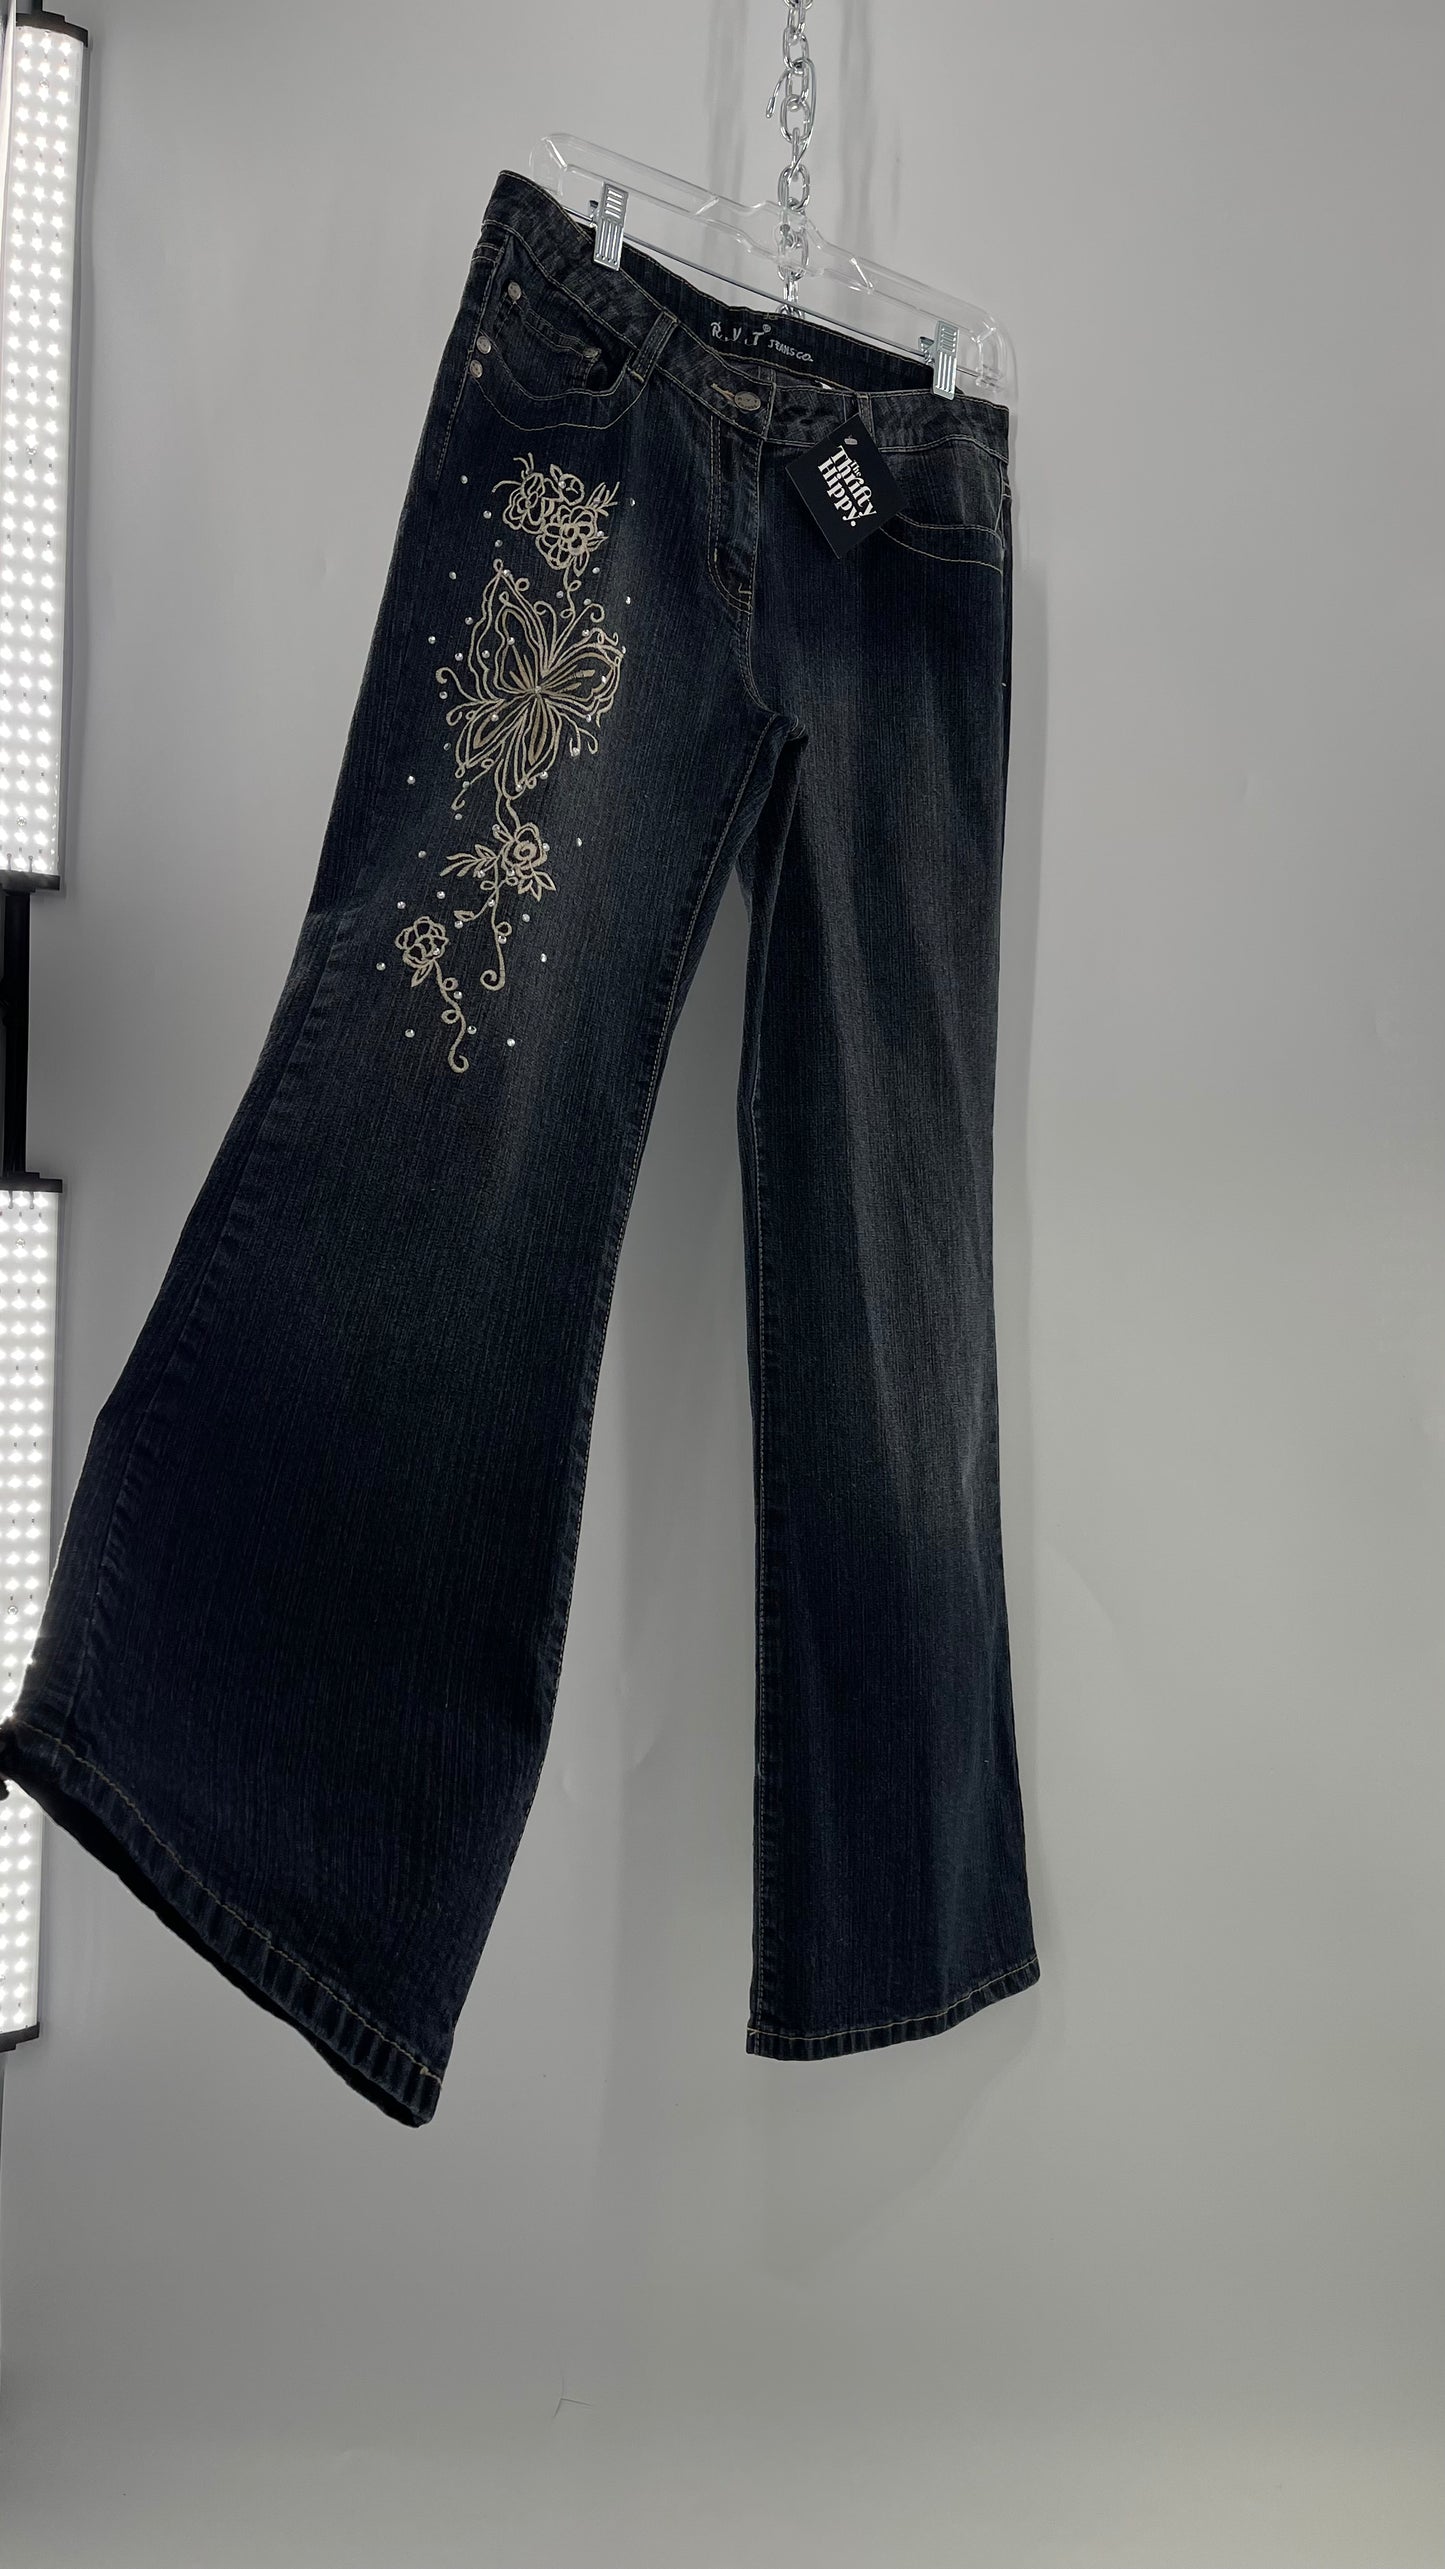 Vintage RVT Grey Kickflare Jeans  with Butterfly Embroidery and Rhinestone Embellishment (9/10)